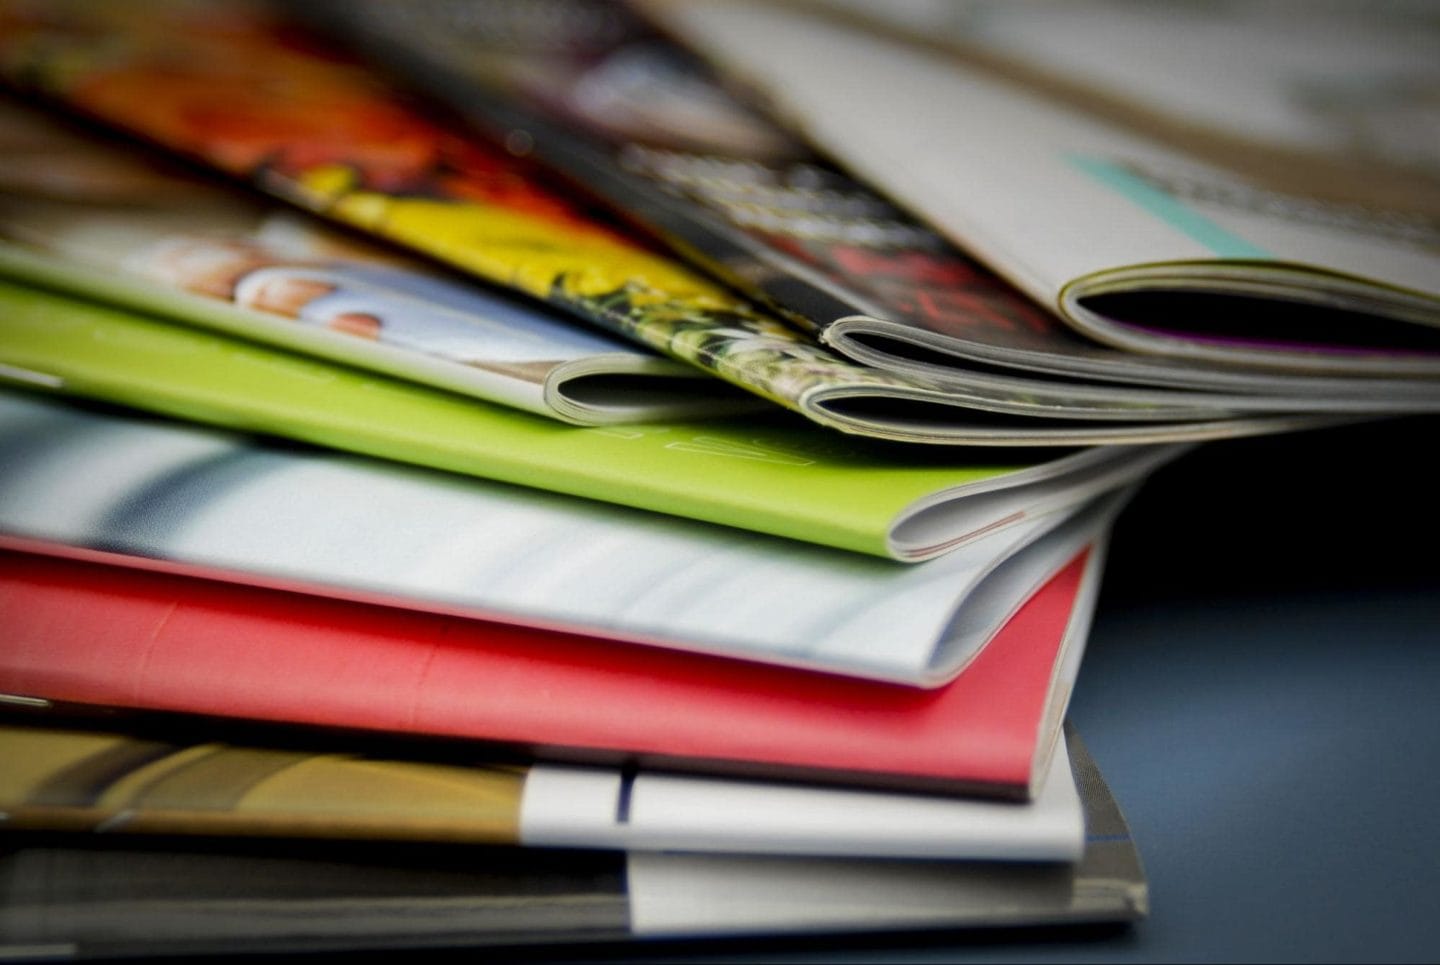 A set of colorful printed magazines assorted on a table.